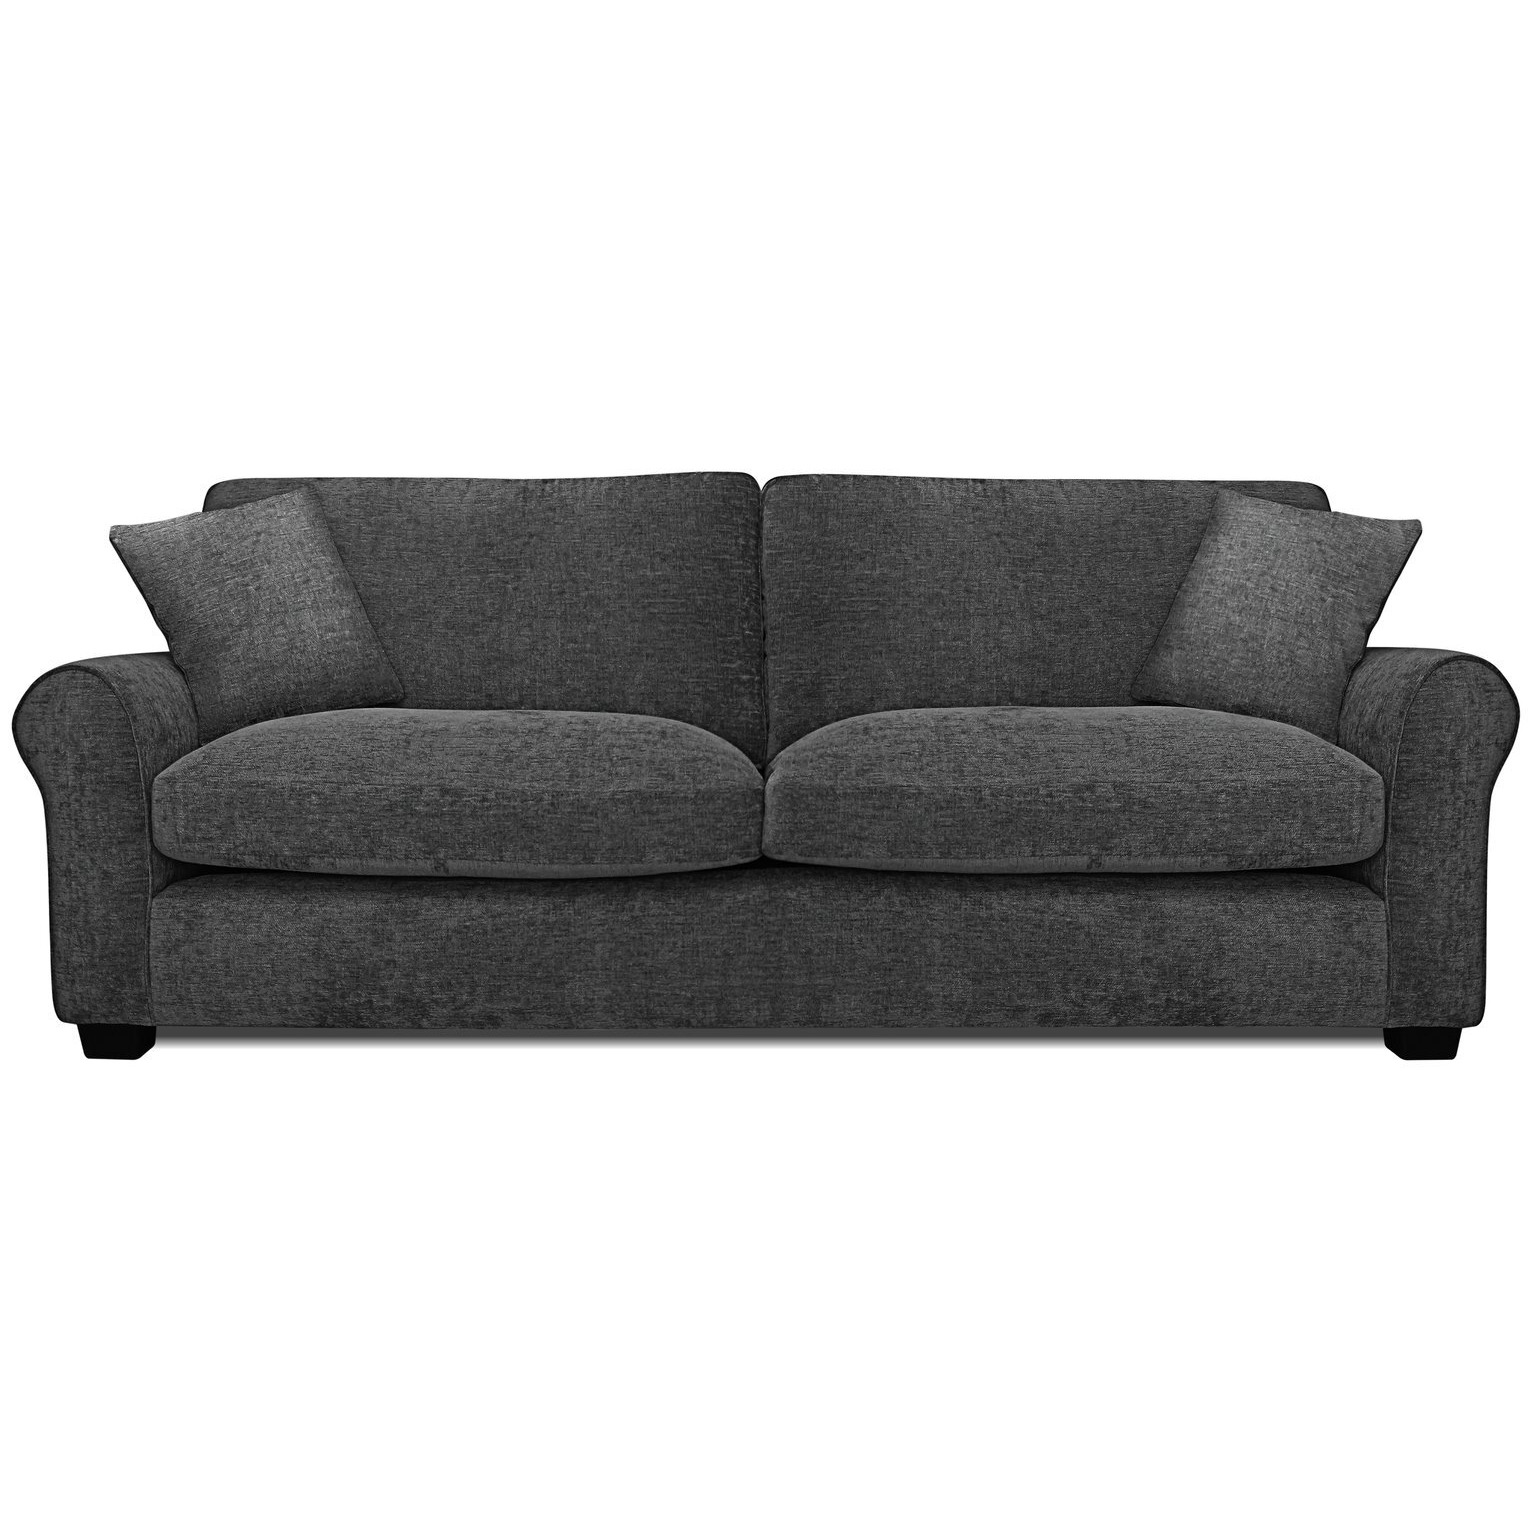 Argos Home Tammy 4 Seater Fabric Sofa - Charcoal - image 1